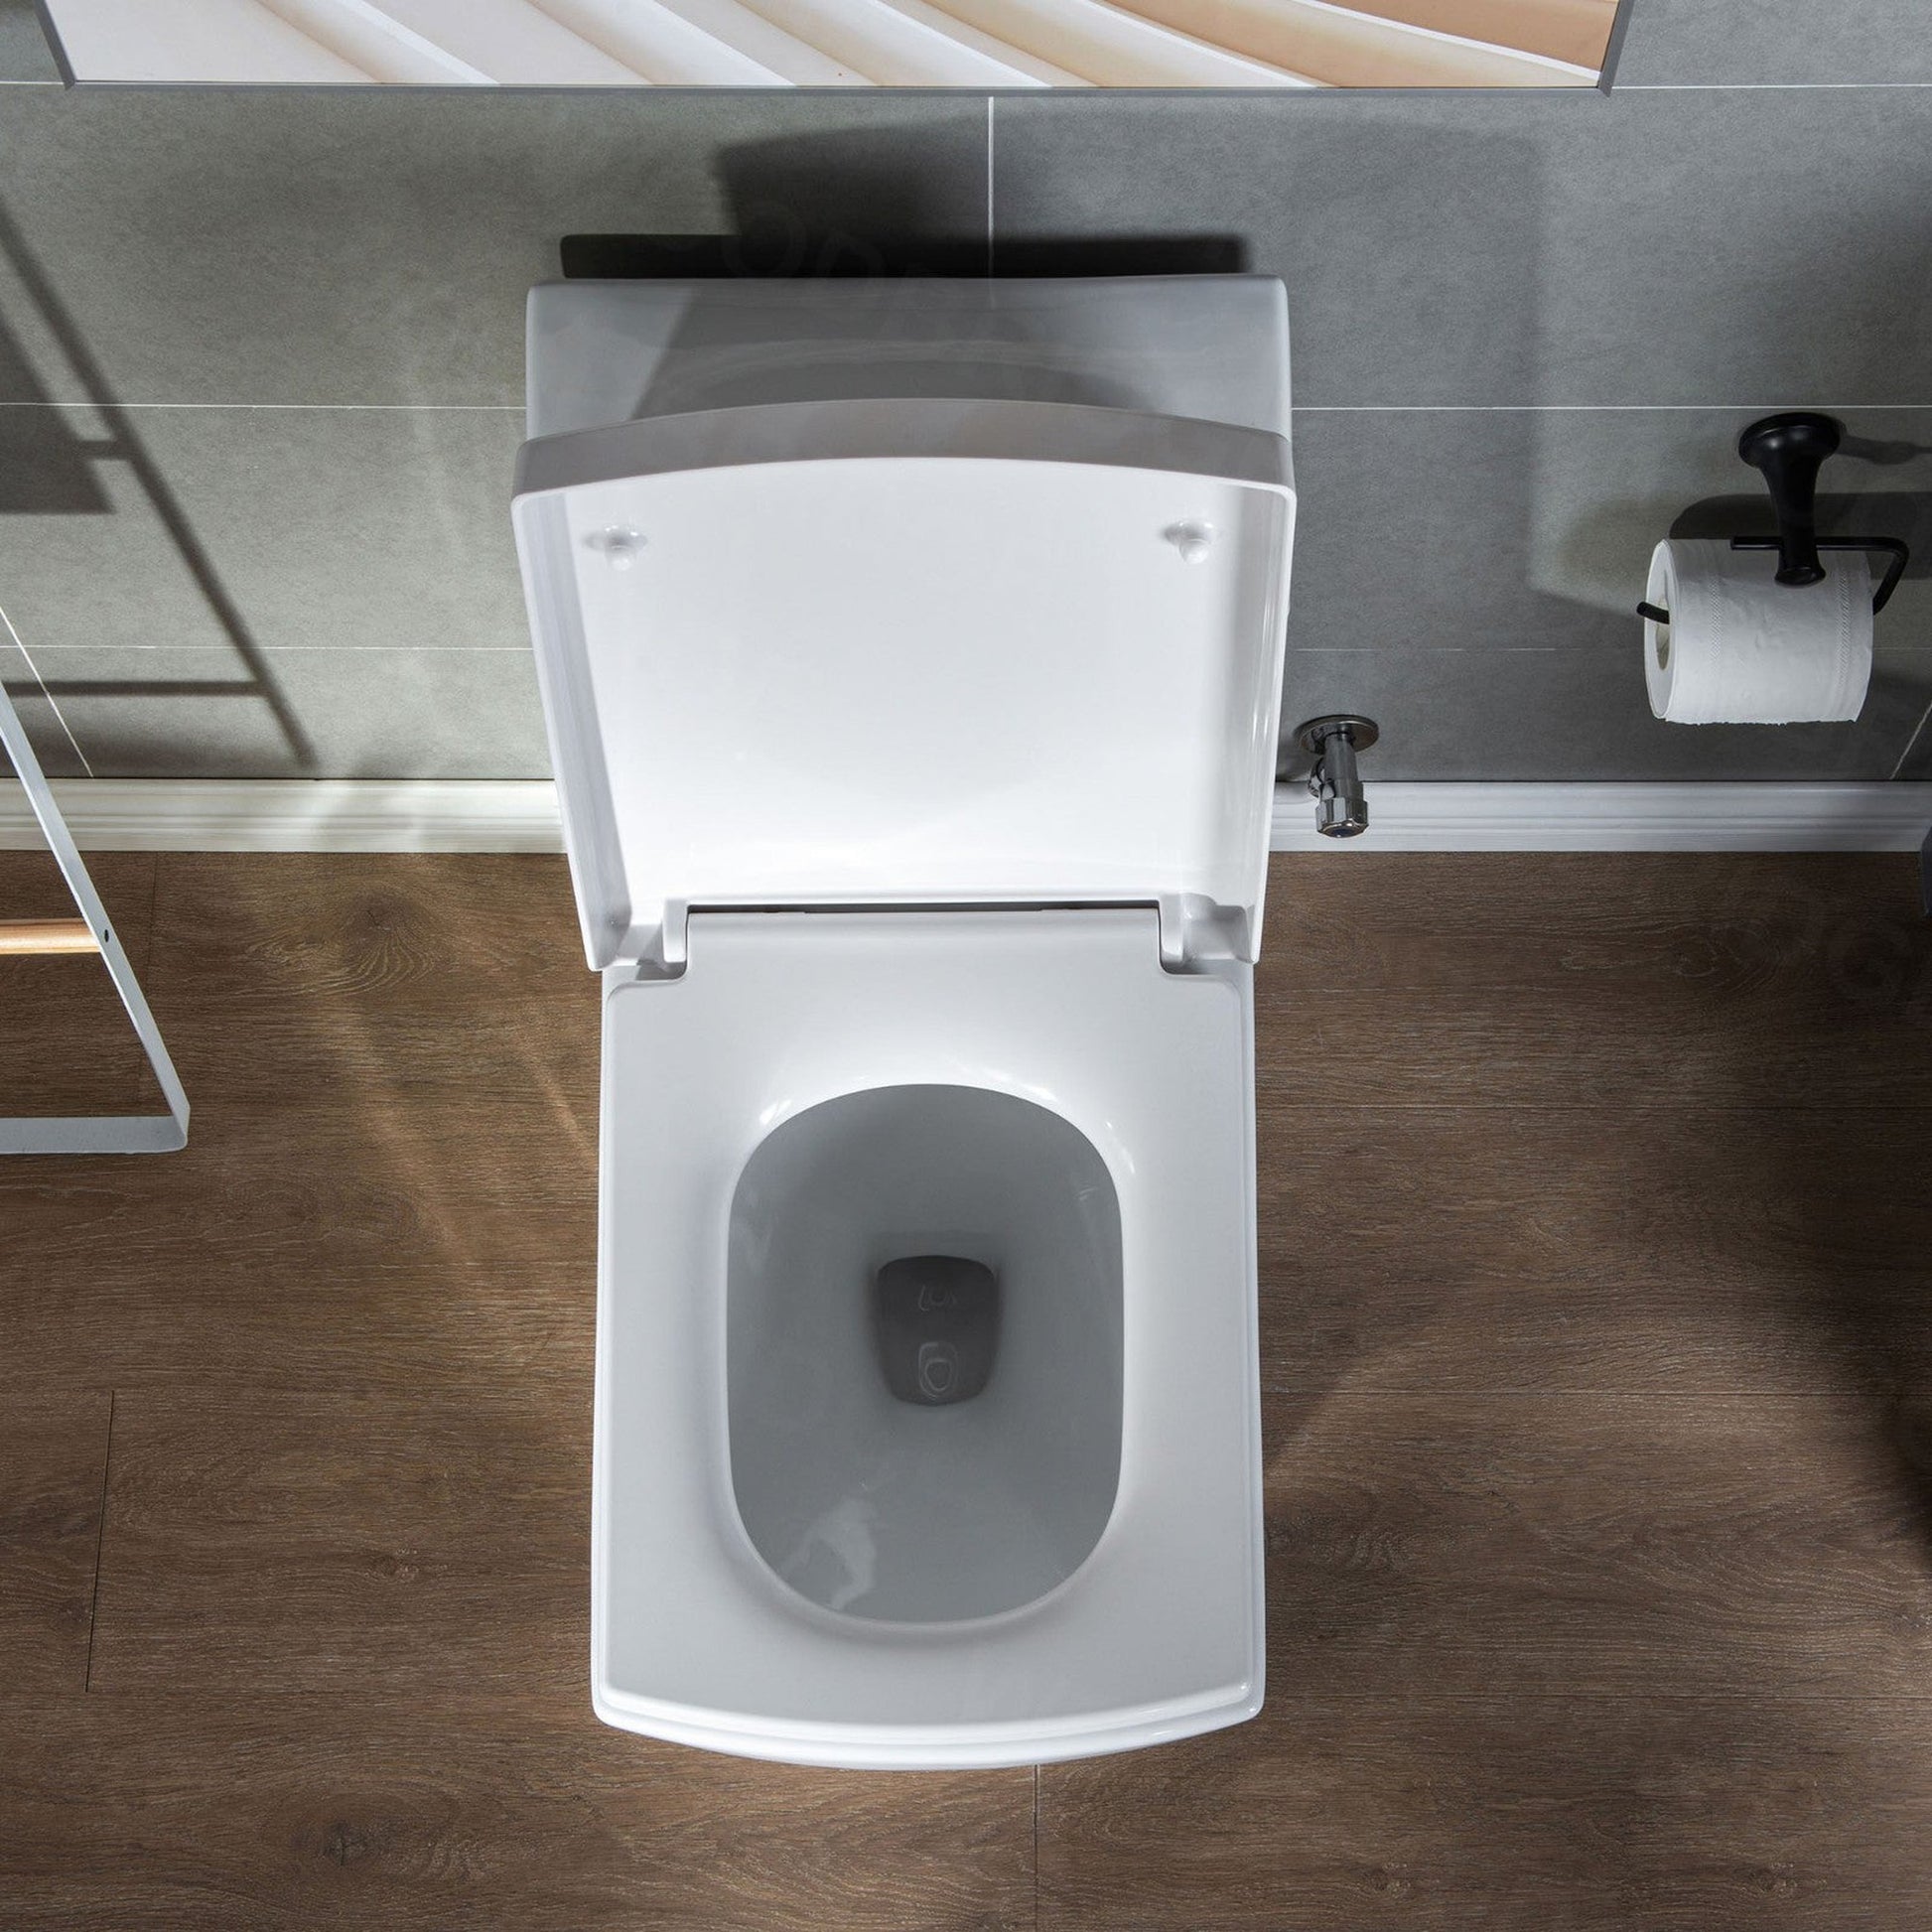 WoodBridge T0020-BN Modern Square Design One Piece Dual Flush 1.28 GP Toilet, Chair Height With Soft Closing Seat and Brushed Nickel Button